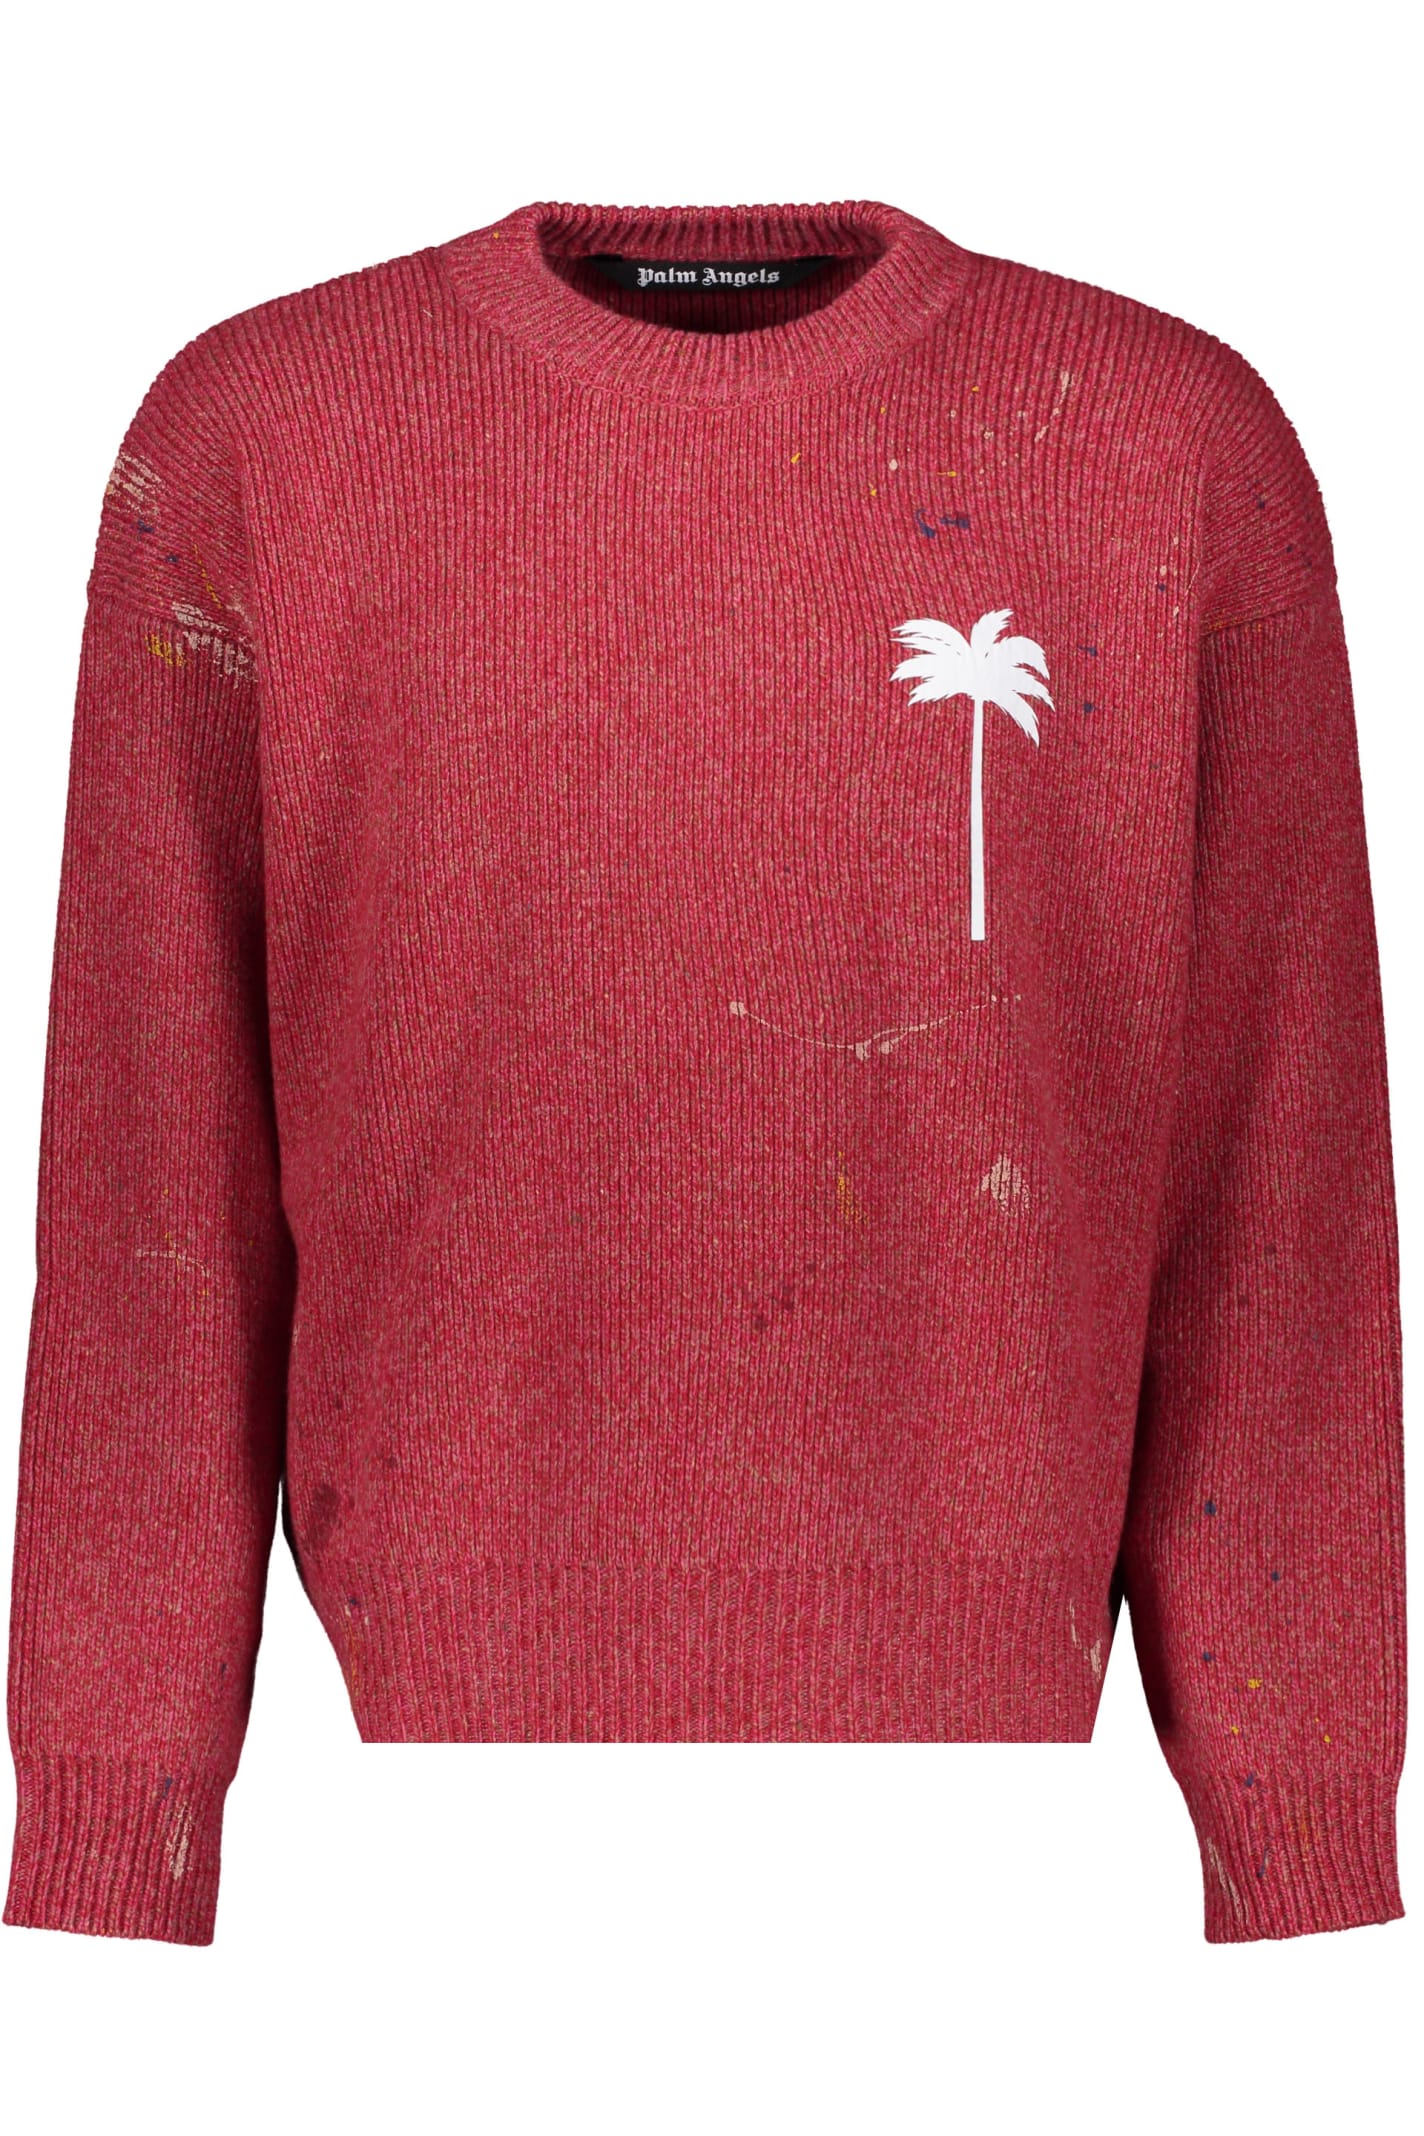 Palm Angels Long Sleeve Crew-neck Sweater In Red